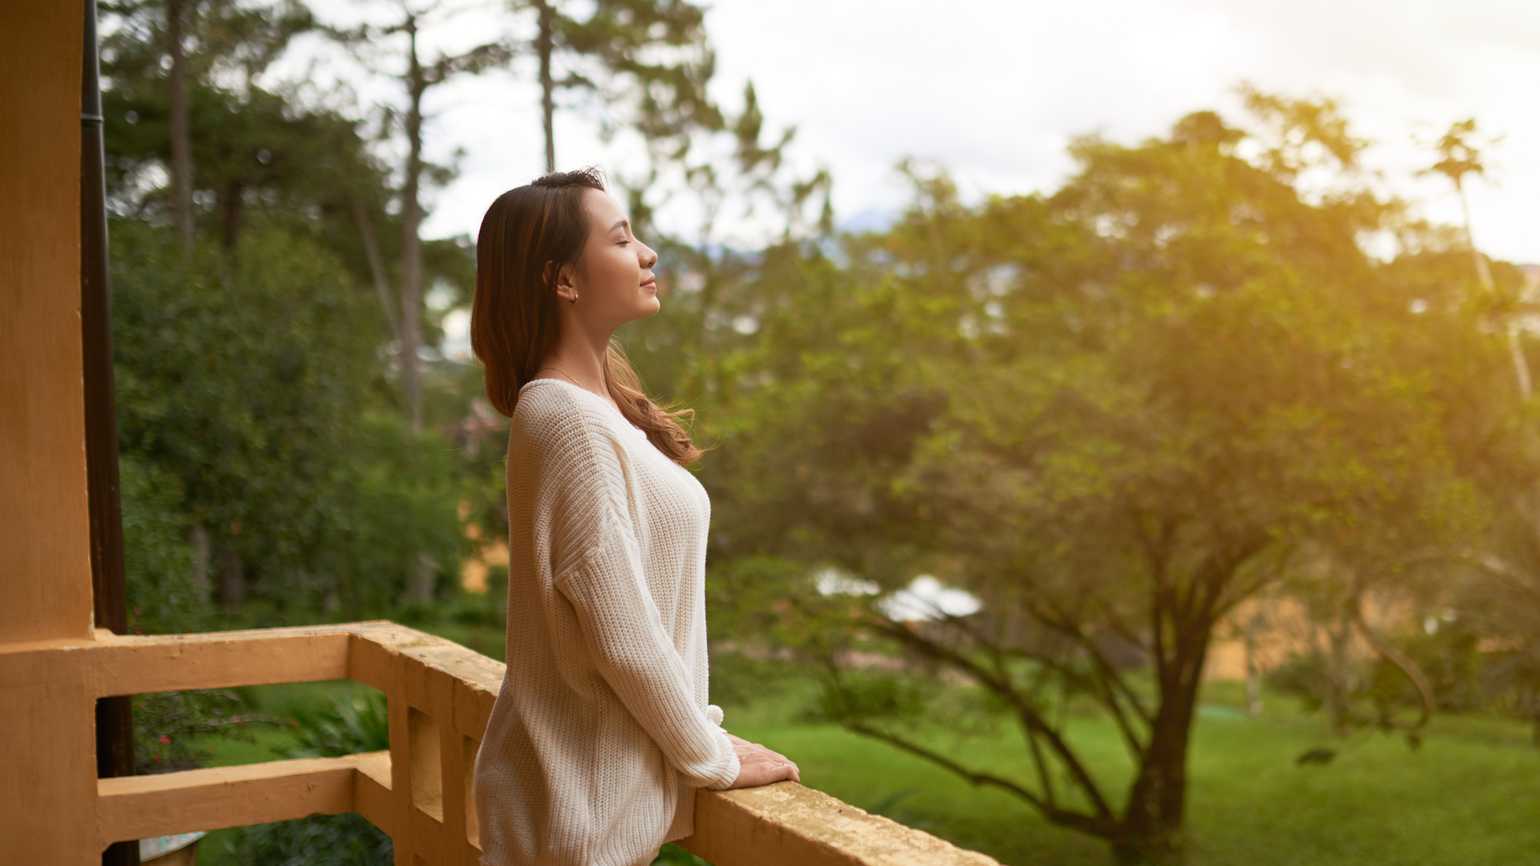 4 Easy Ways to Embrace the Healing Power of Nature | Guideposts